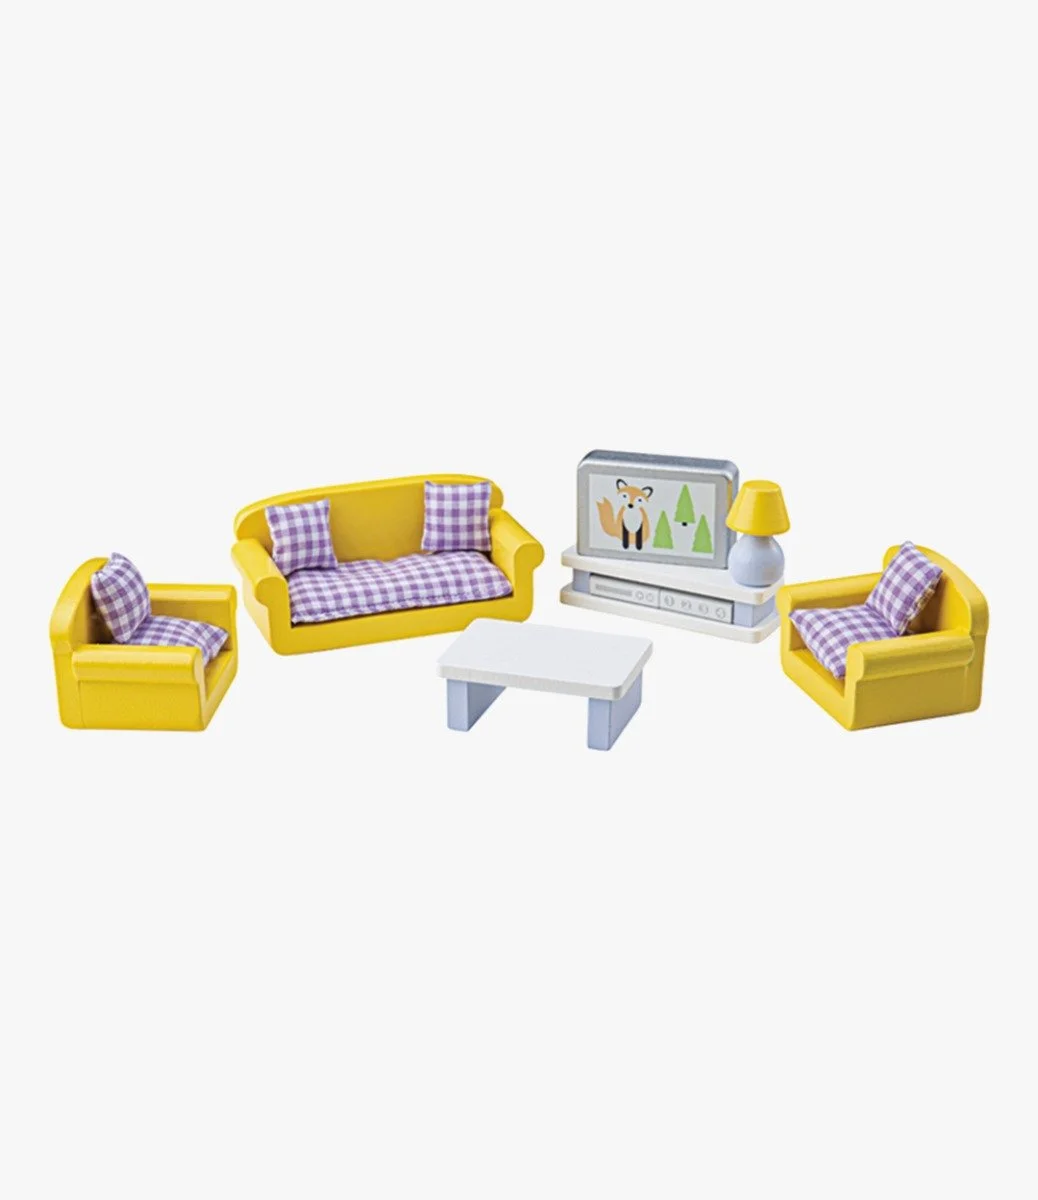 Wooden Doll House Furniture Set - Living Room by Tidlo